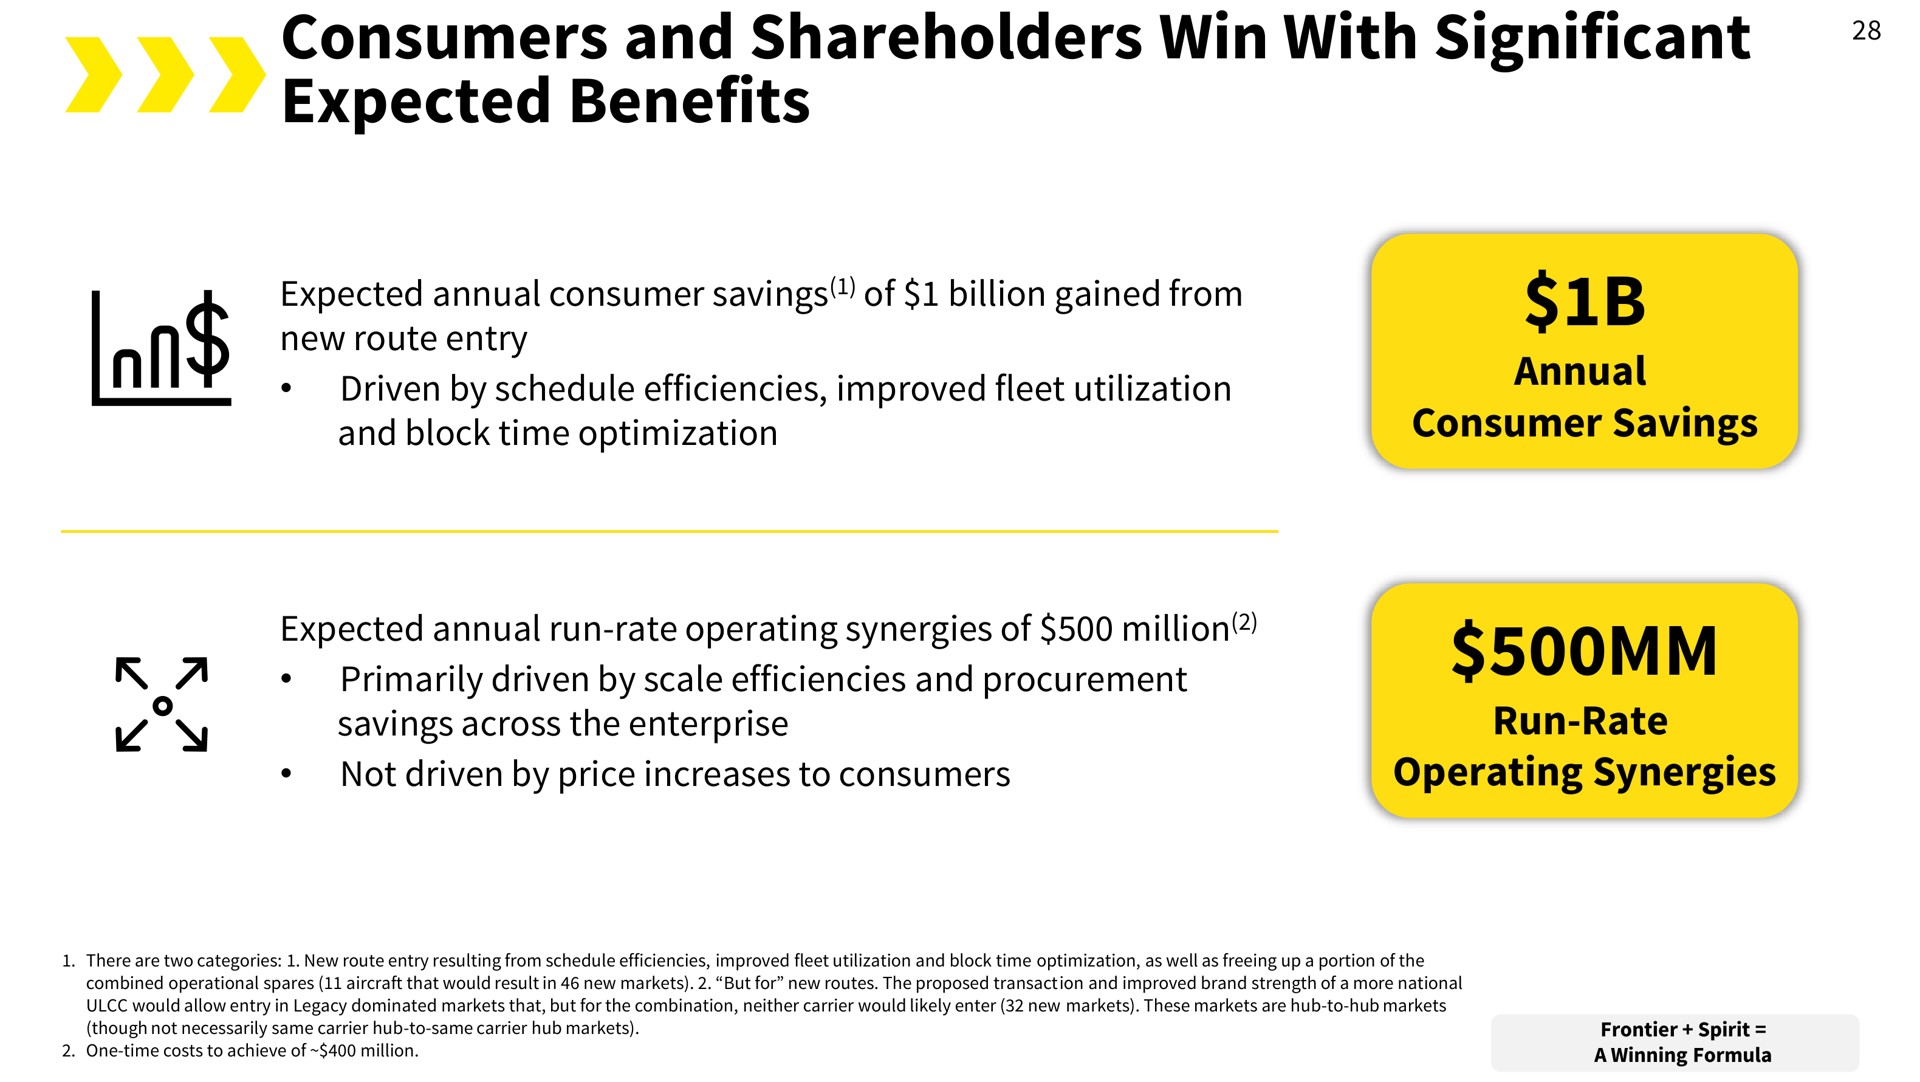 consumers and shareholders win with significant expected benefits | Spirit